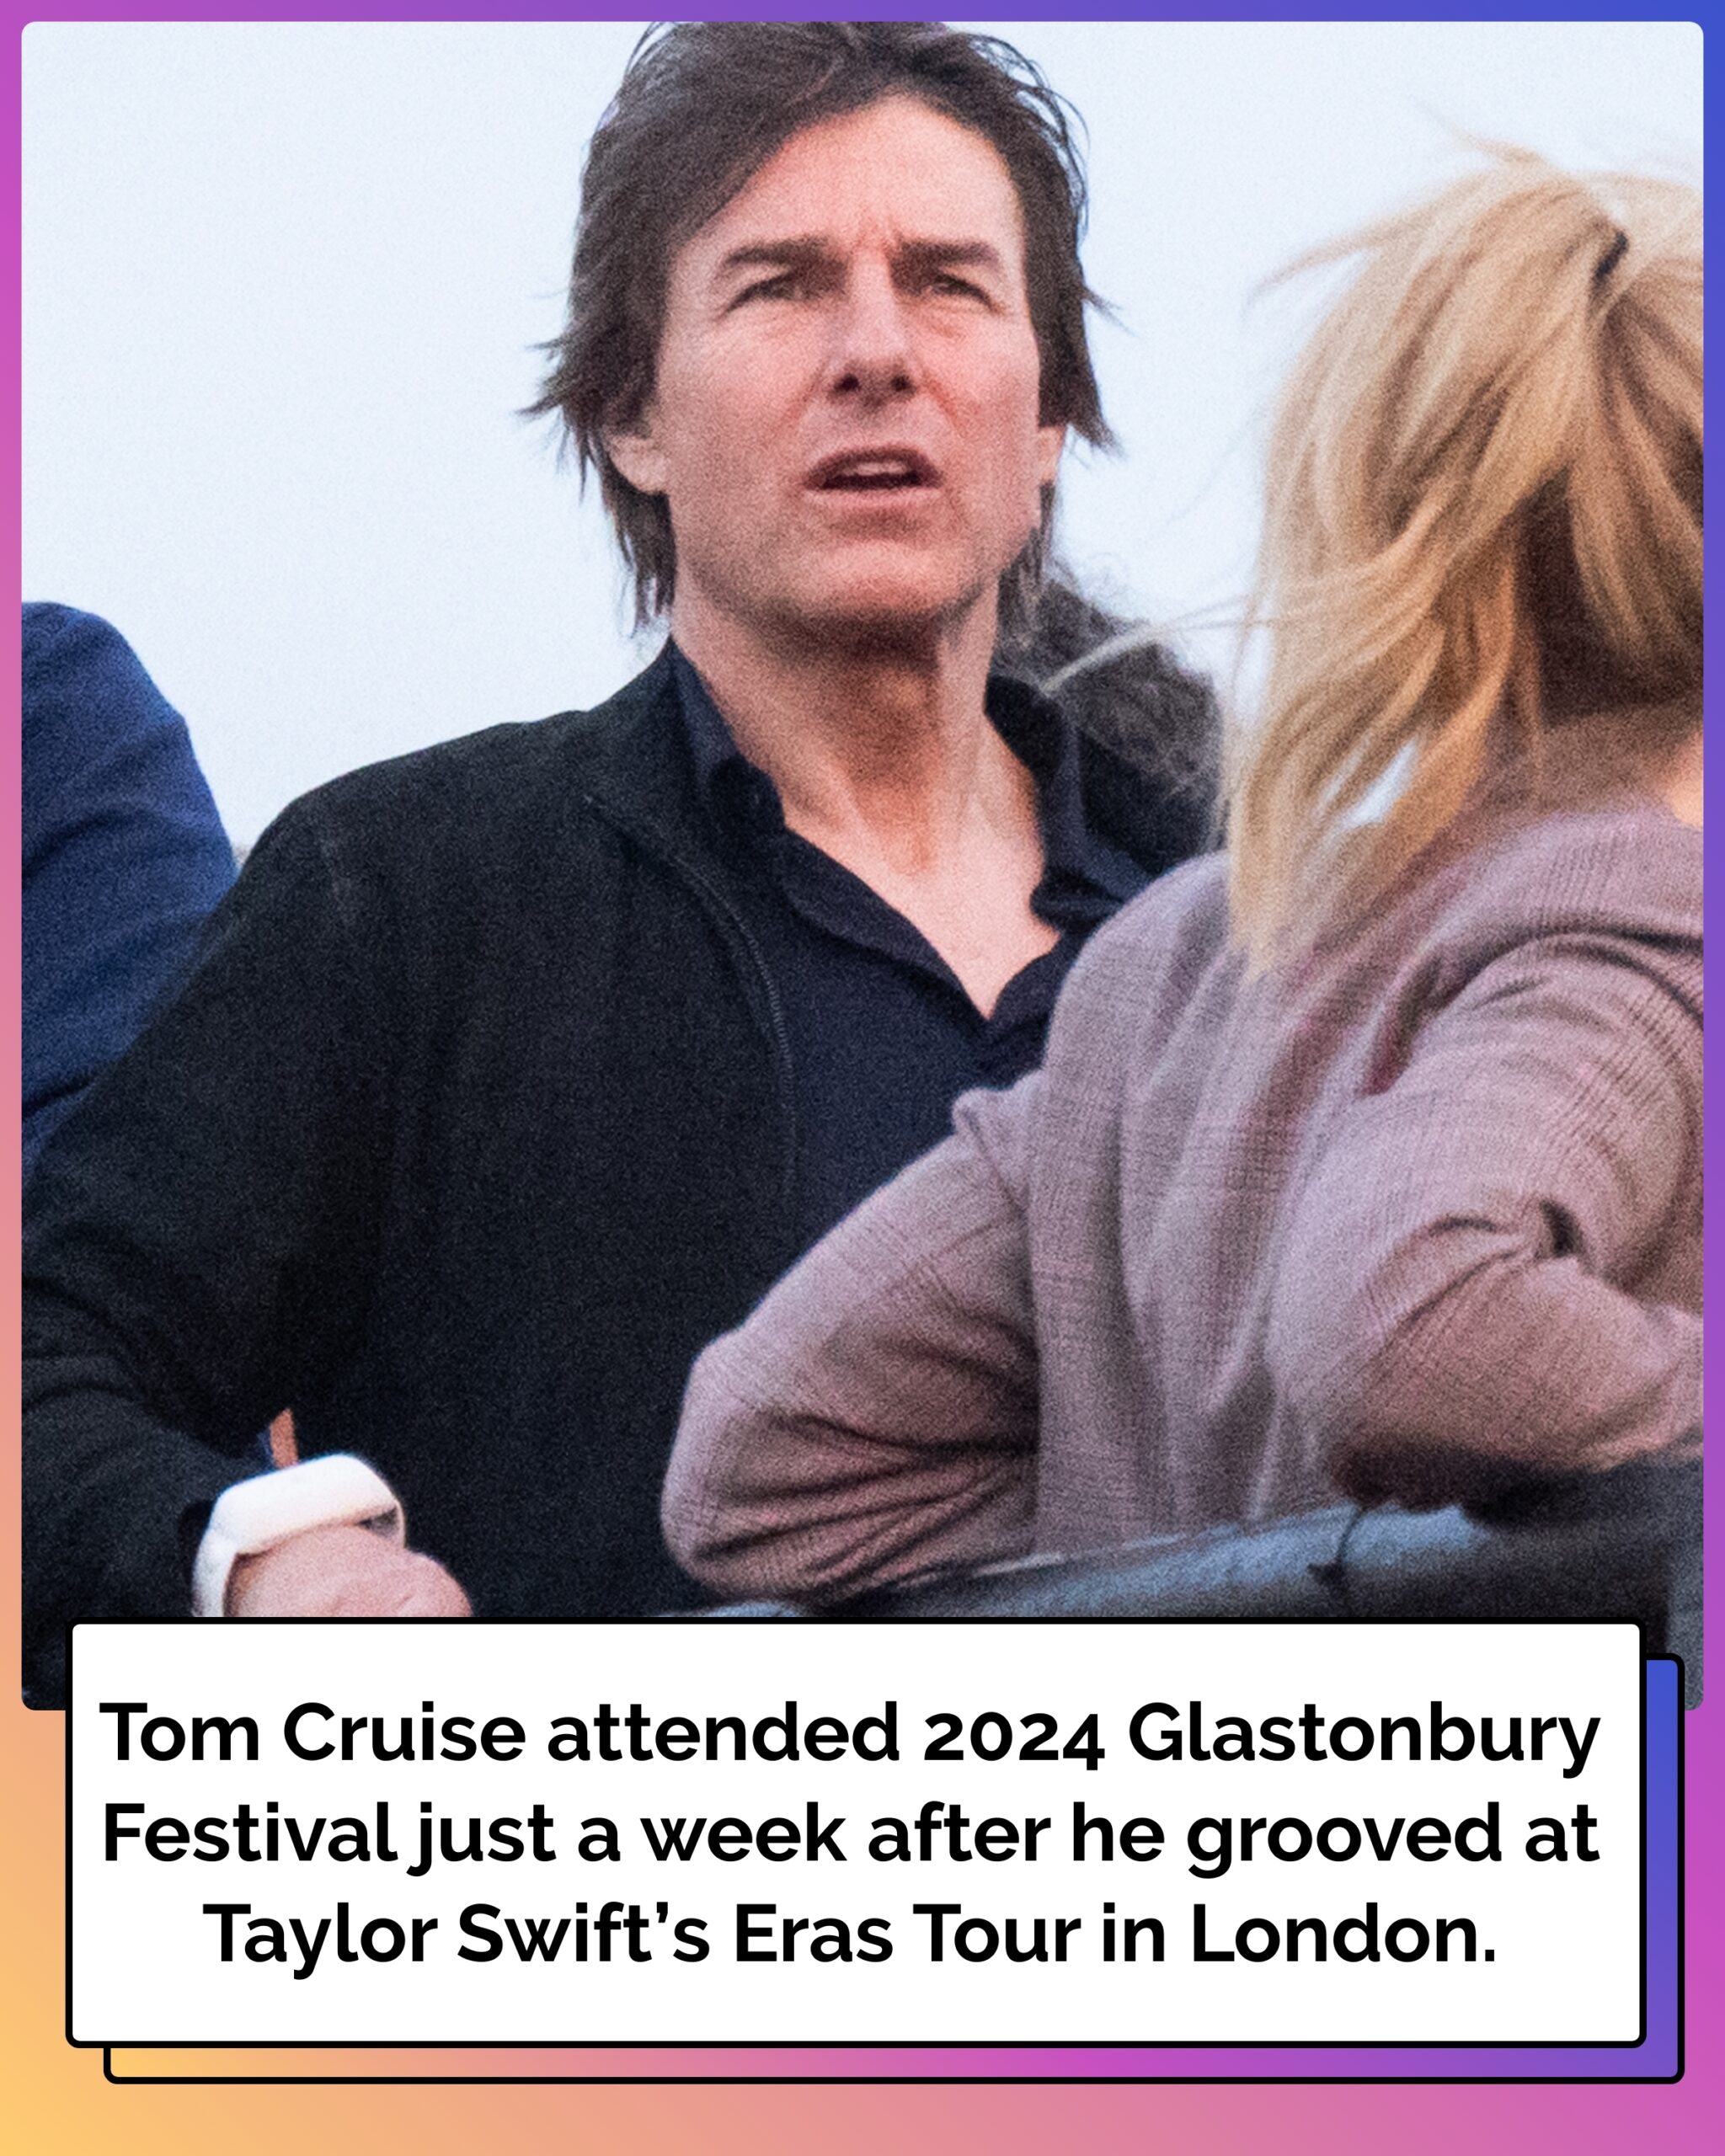 Tom Cruise Spotted at Glastonbury 1 Week After Attending Taylor Swift’s ‘Eras Tour’